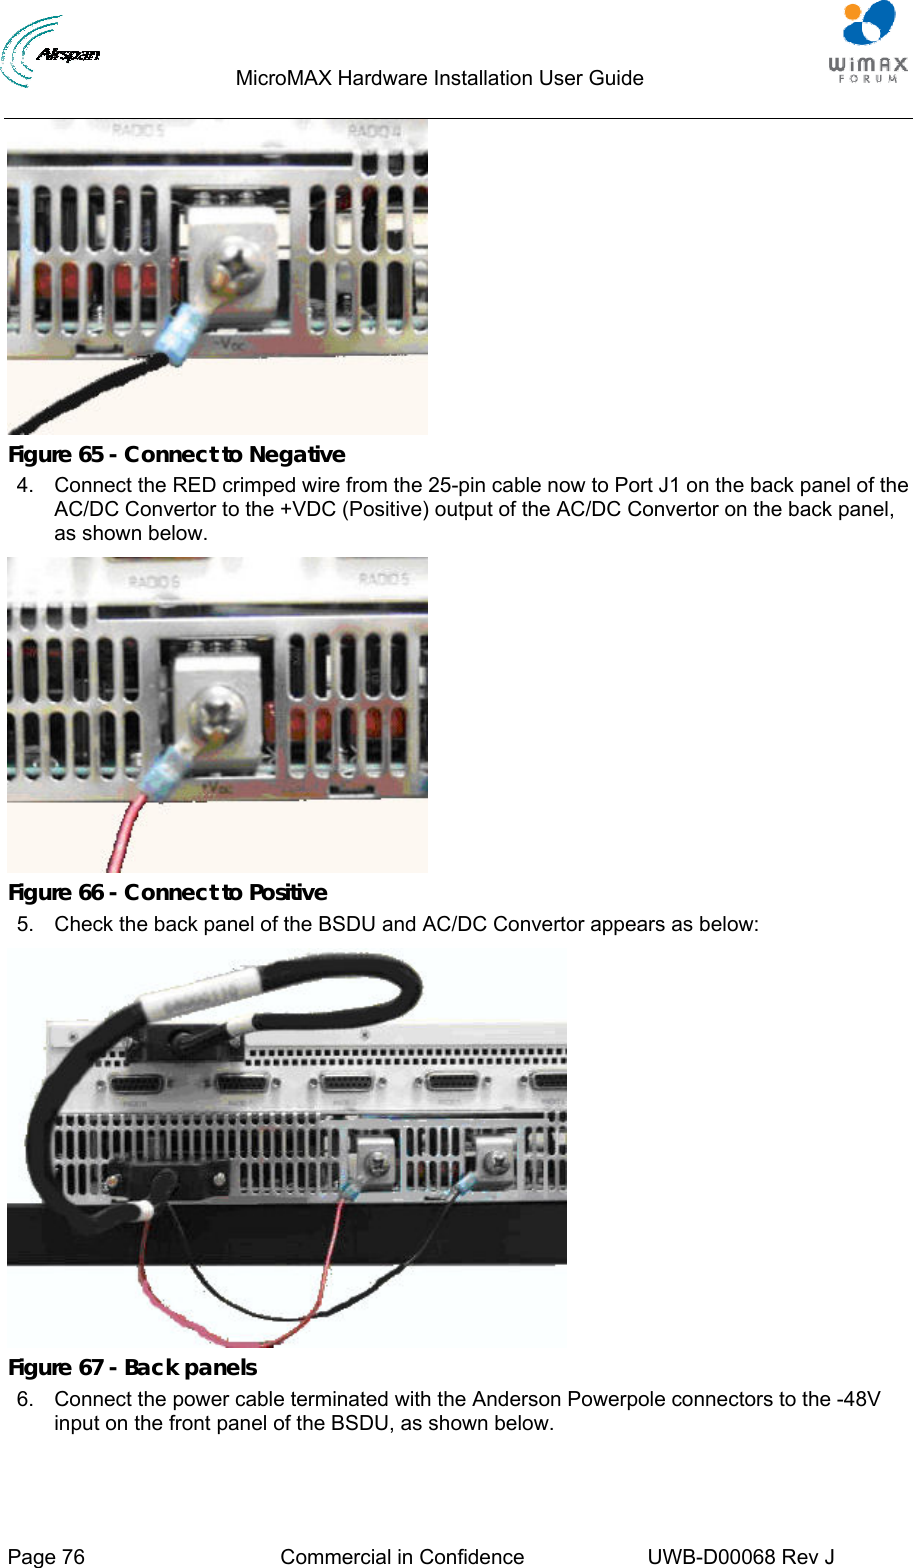                                  MicroMAX Hardware Installation User Guide     Page 76  Commercial in Confidence  UWB-D00068 Rev J    Figure 65 - Connect to Negative 4.  Connect the RED crimped wire from the 25-pin cable now to Port J1 on the back panel of the AC/DC Convertor to the +VDC (Positive) output of the AC/DC Convertor on the back panel, as shown below.  Figure 66 - Connect to Positive 5.  Check the back panel of the BSDU and AC/DC Convertor appears as below:  Figure 67 - Back panels 6.  Connect the power cable terminated with the Anderson Powerpole connectors to the -48V input on the front panel of the BSDU, as shown below. 